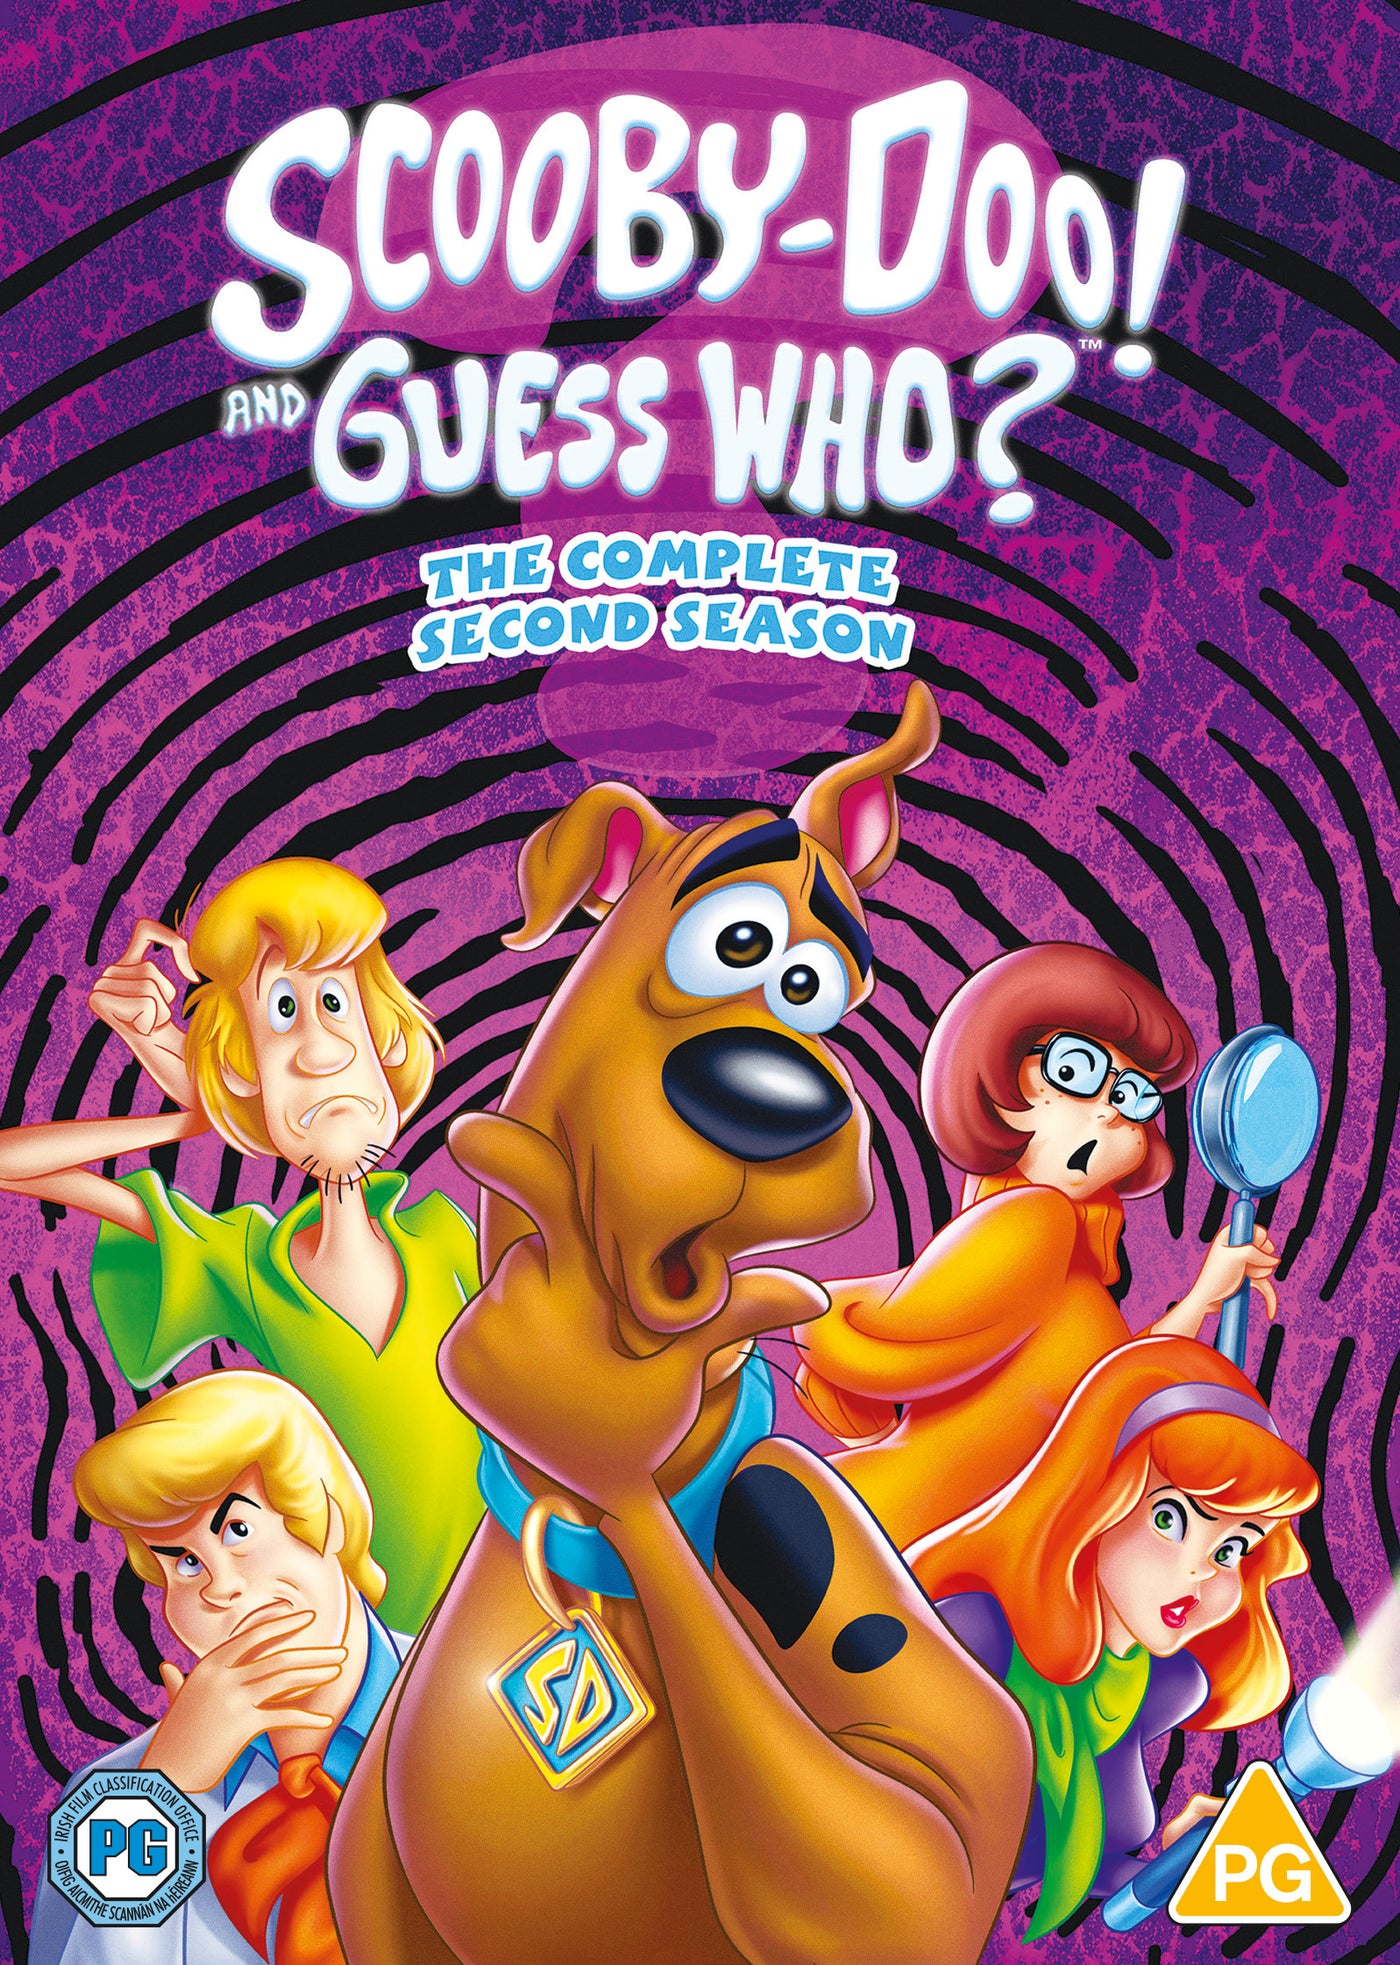 Scooby-Doo! and Guess Who?: Season 2 (DVD) (2020)